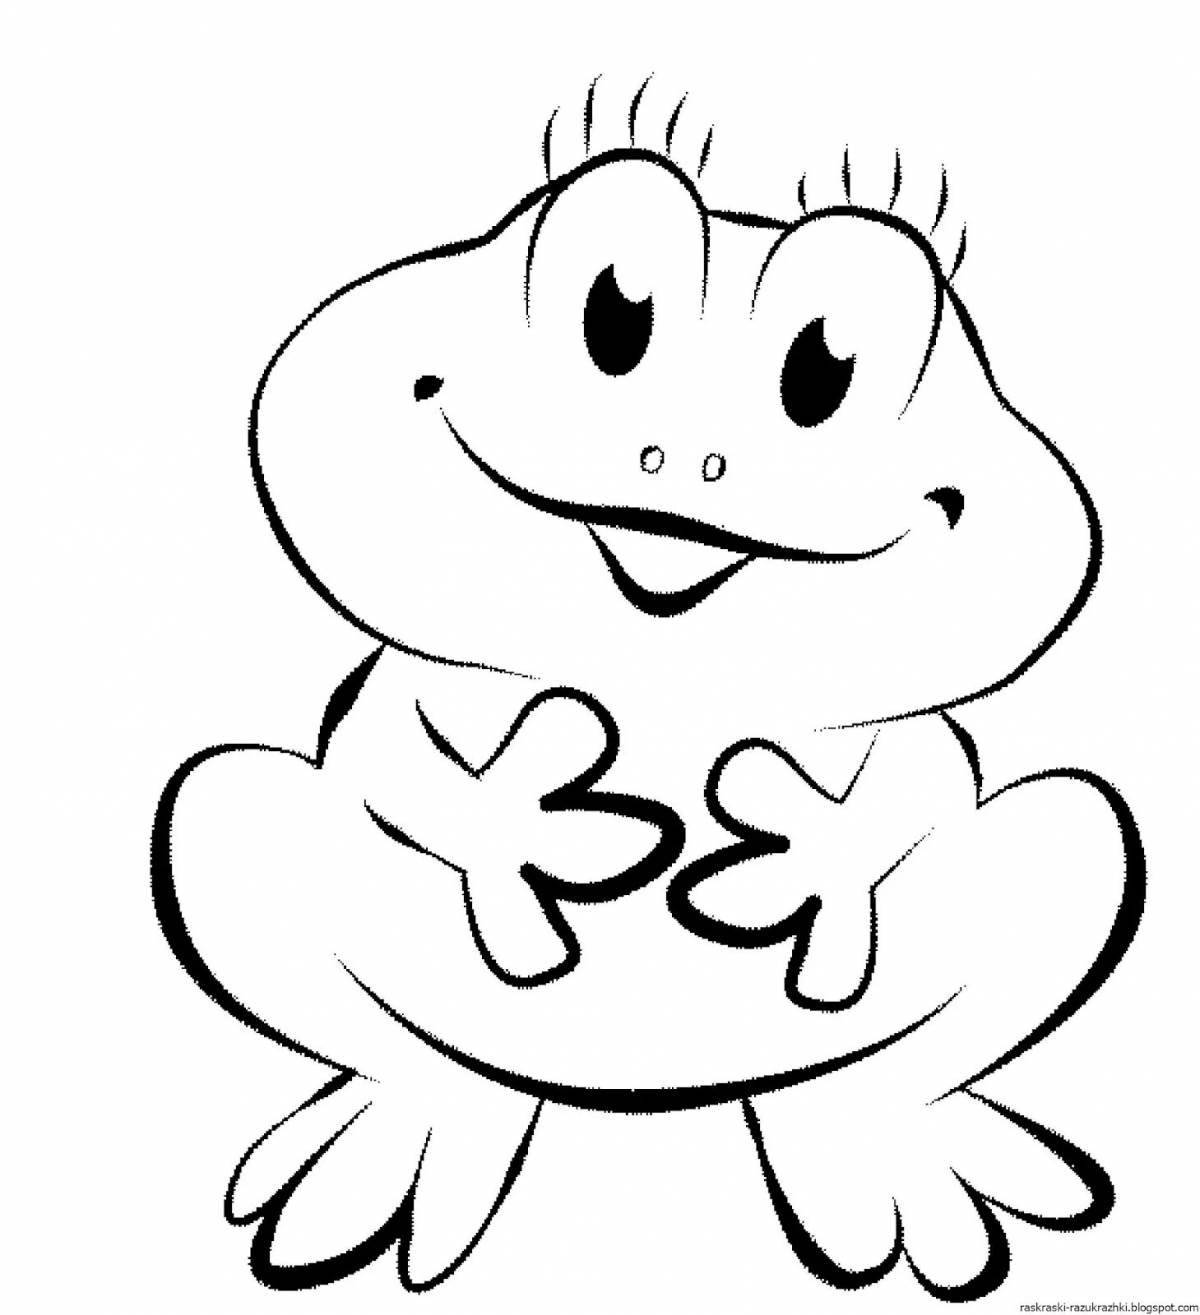 Adorable frog coloring book for 3-4 year olds